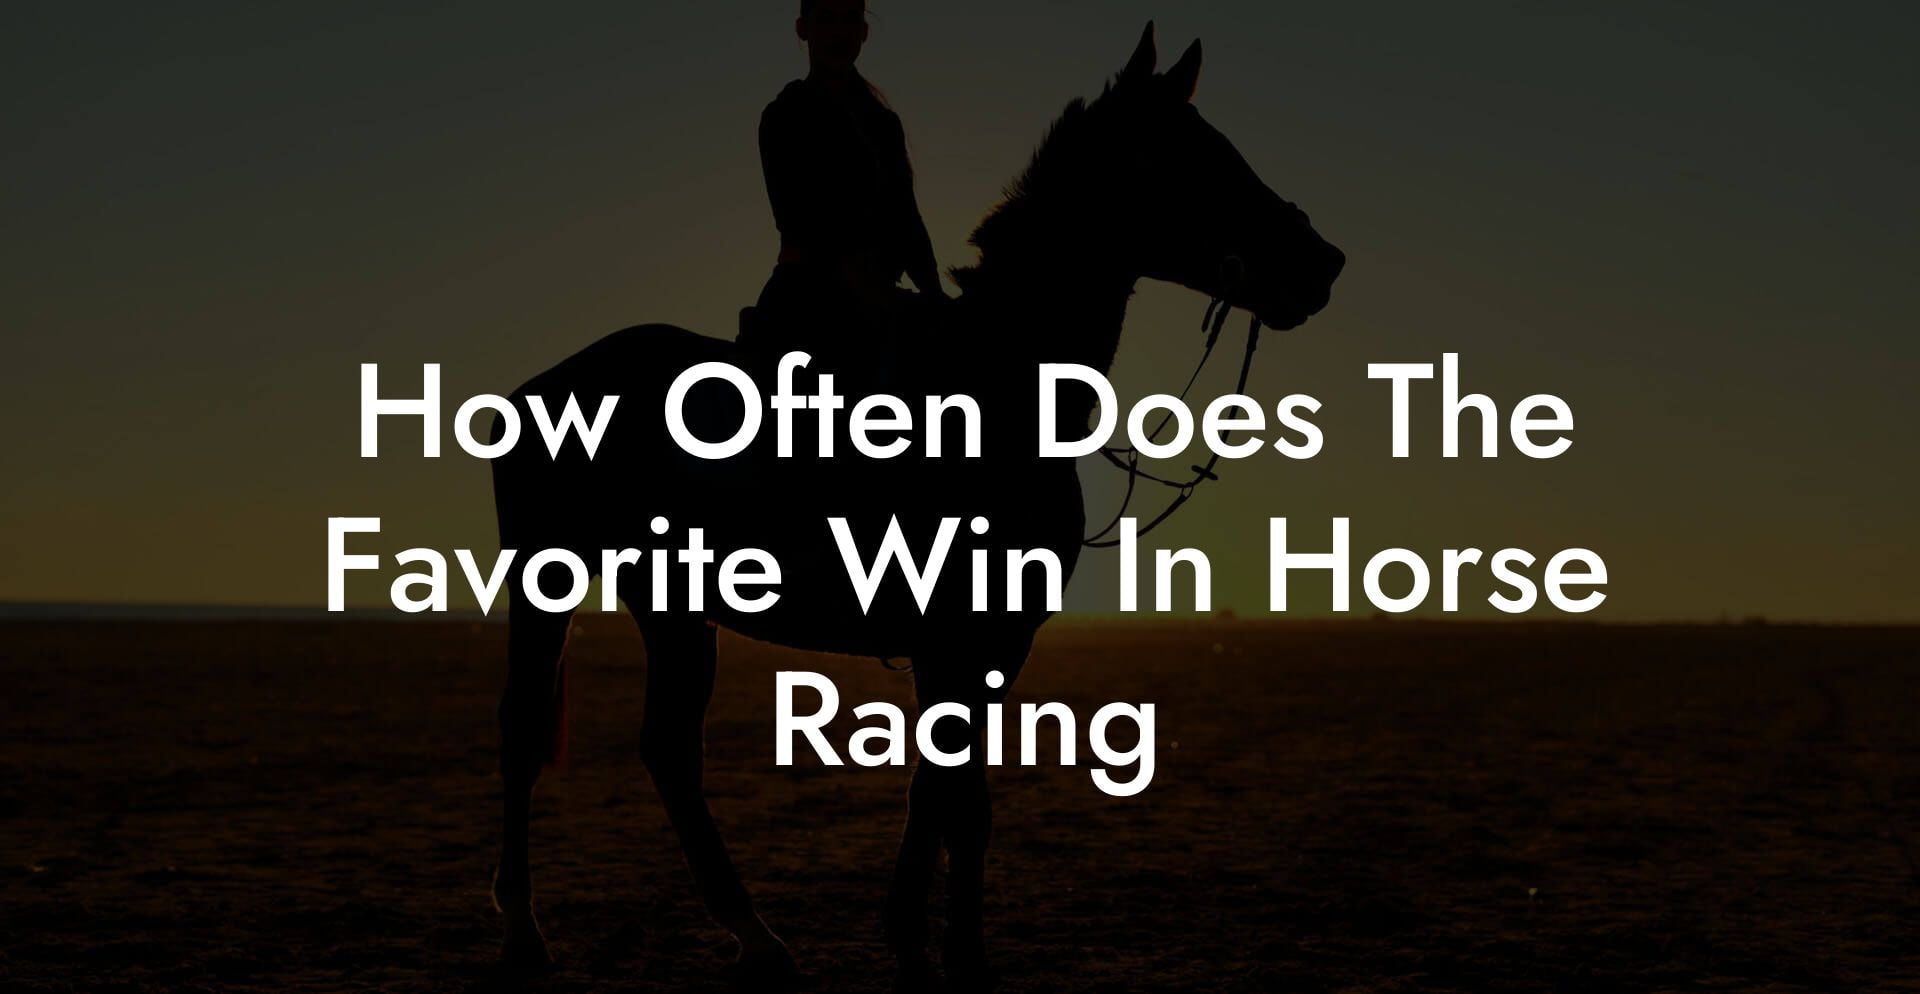 How Often Does The Favorite Win In Horse Racing